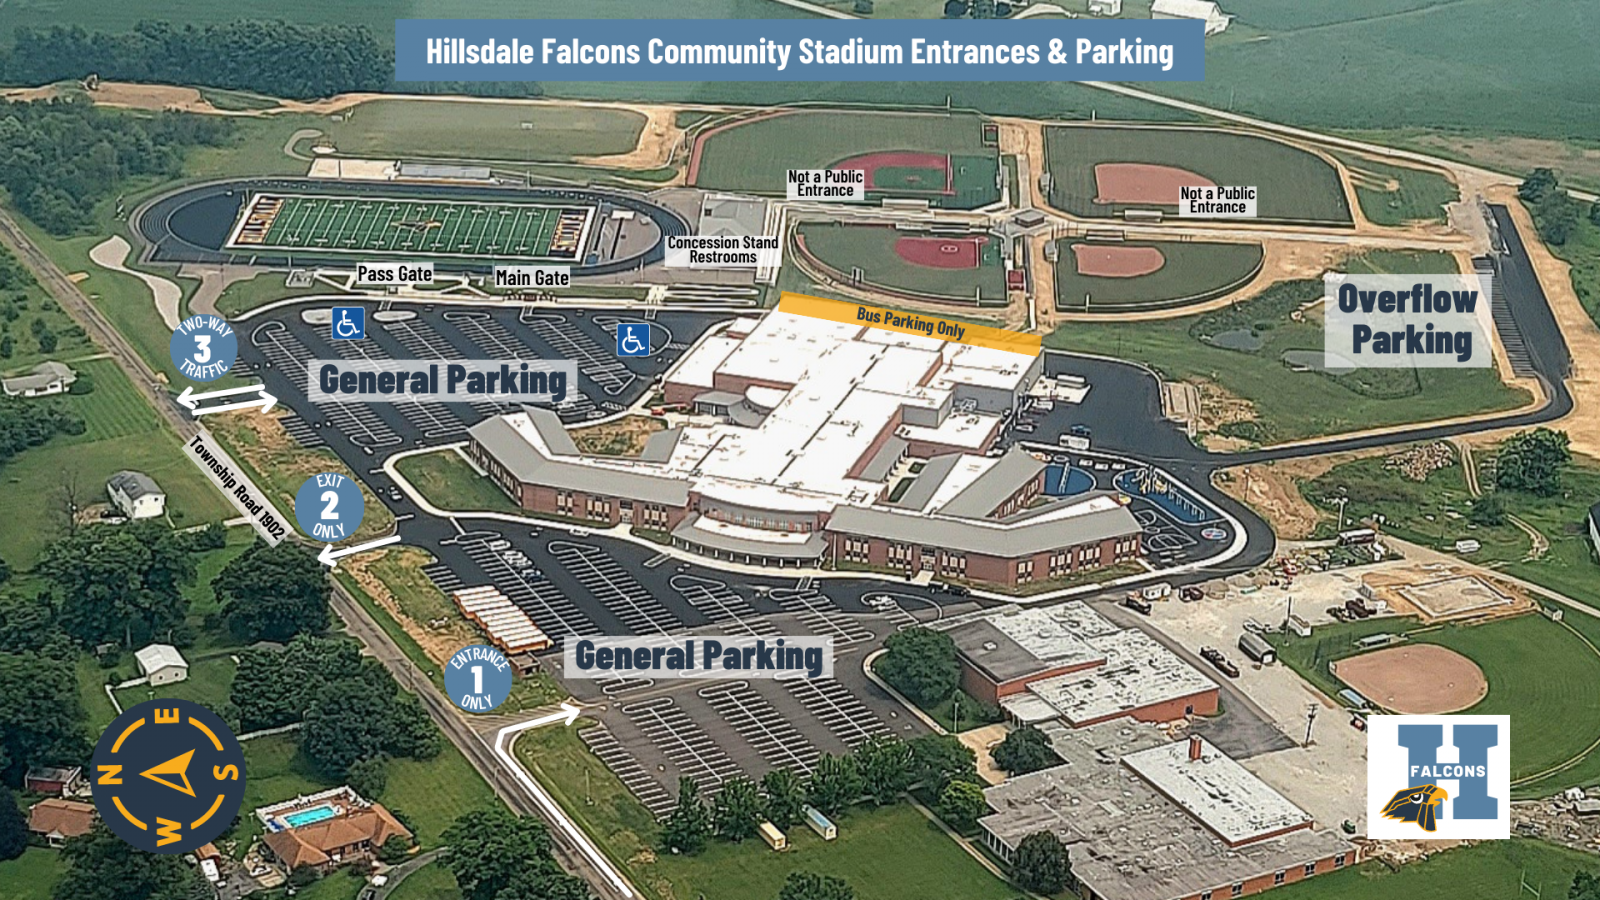 An image of the Hillsdale Local Schools campus with the parking spaces marked for handicapped parking, general parking, and bus parking. The entrances/exits are also marked.